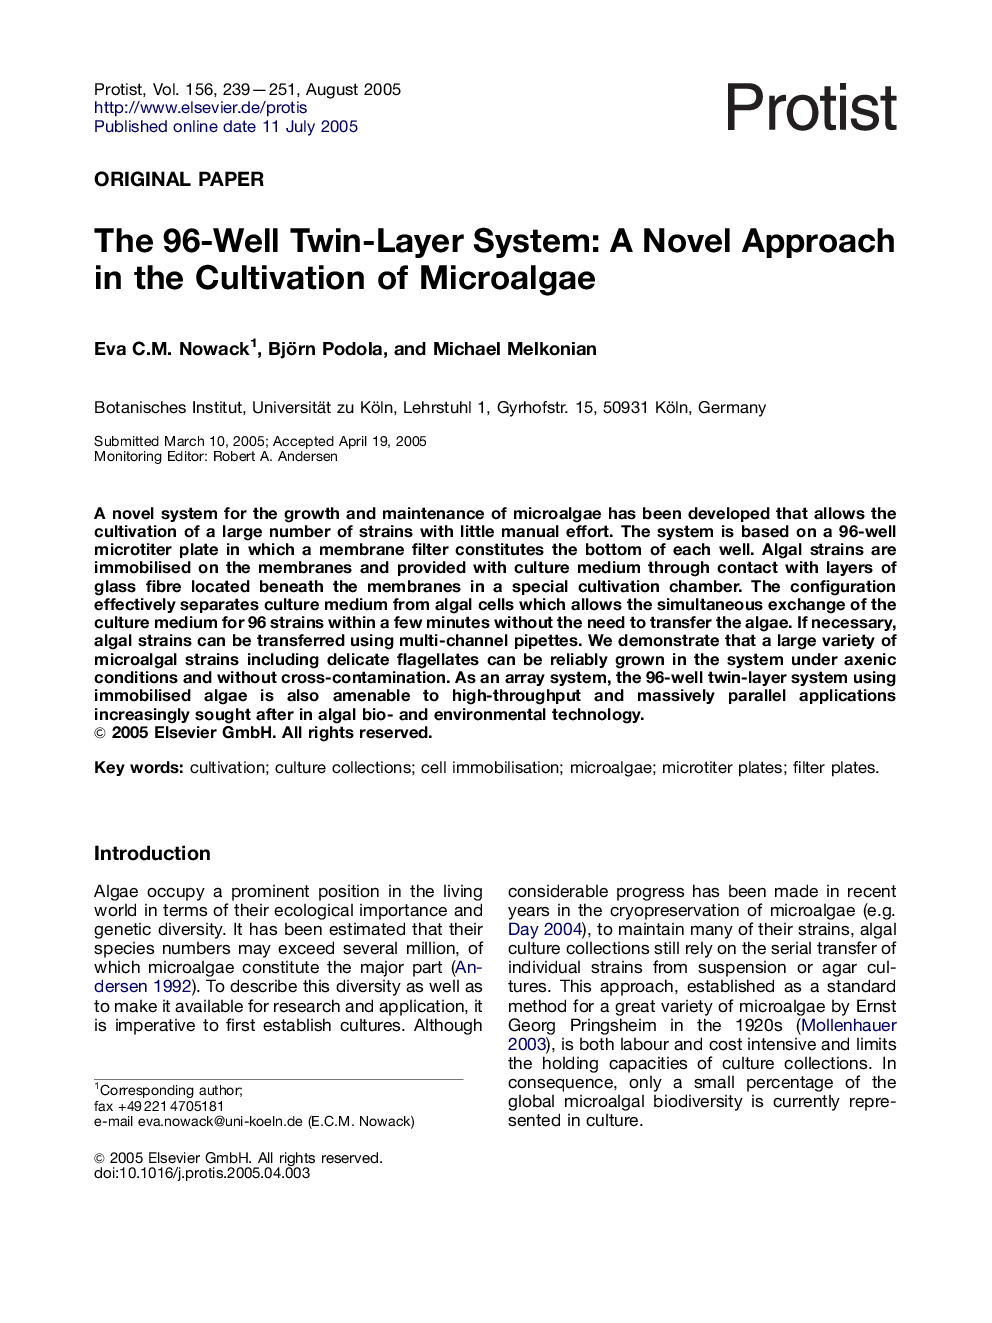 The 96-Well Twin-Layer System: A Novel Approach in the Cultivation of Microalgae